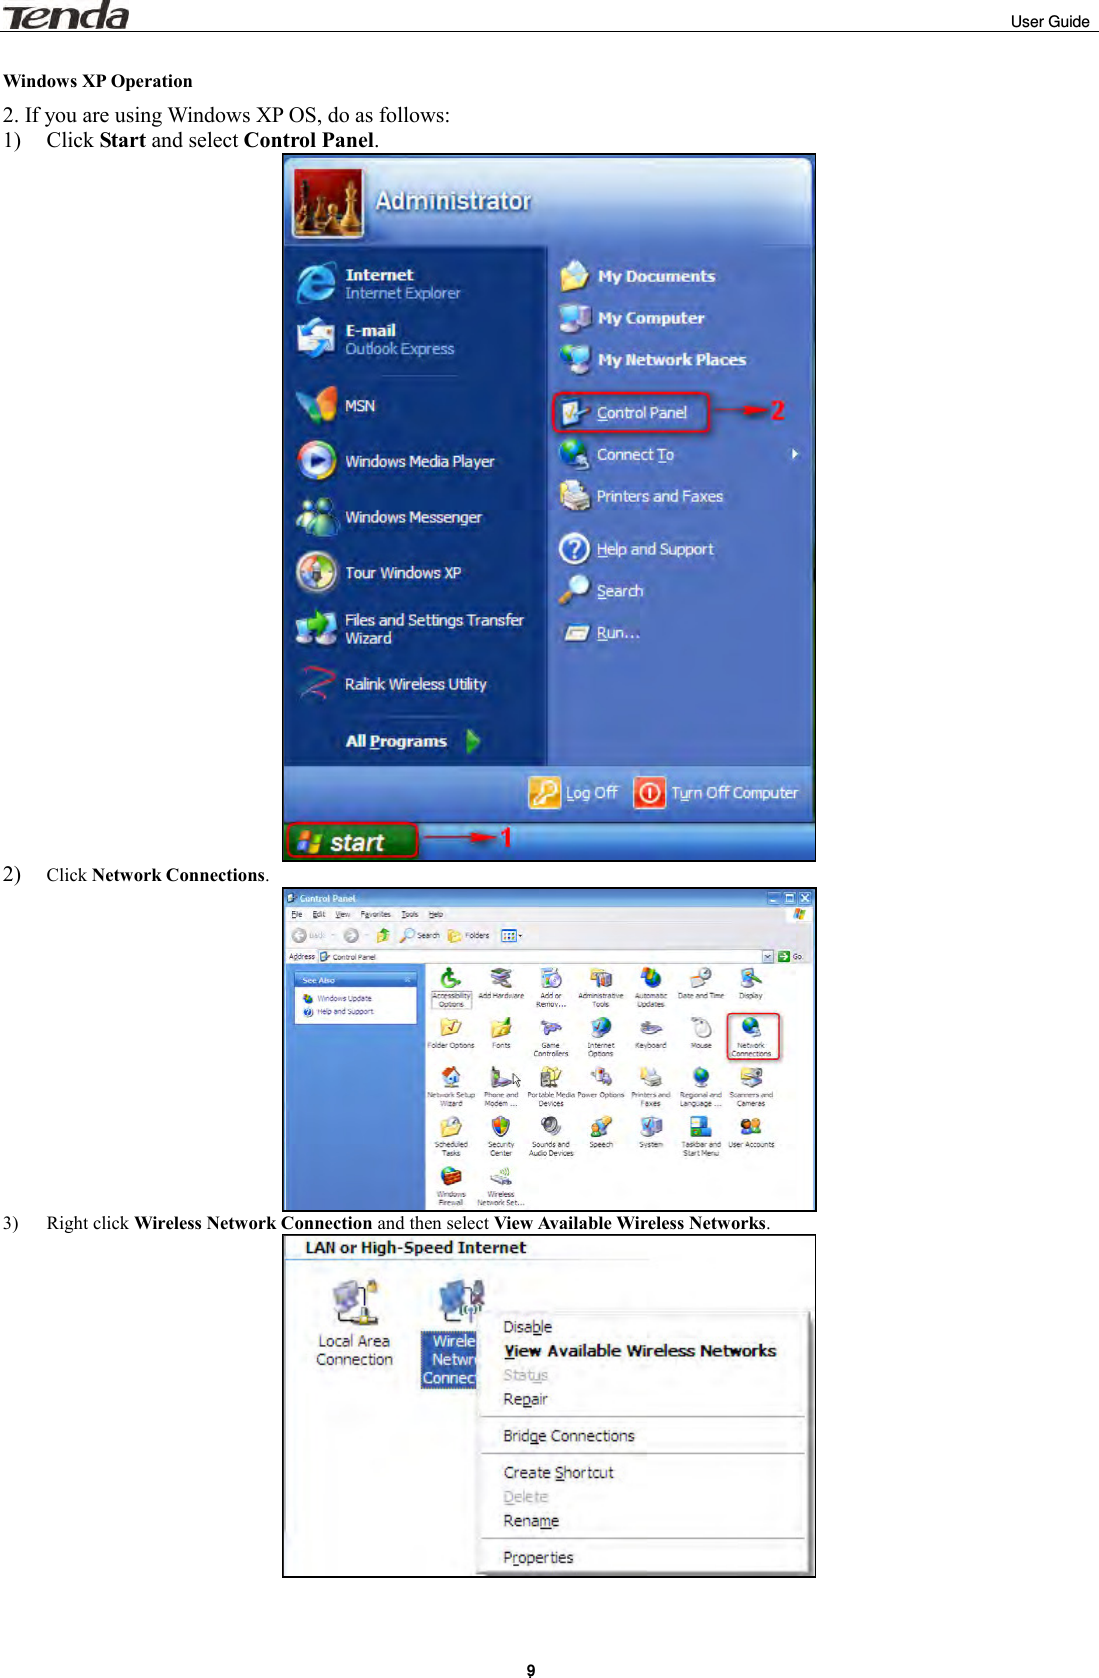                                                                                                                                                                                                                                                   User Guide . 9 Windows XP Operation 2. If you are using Windows XP OS, do as follows: 1)  Click Start and select Control Panel.  2)  Click Network Connections.  3)  Right click Wireless Network Connection and then select View Available Wireless Networks.     